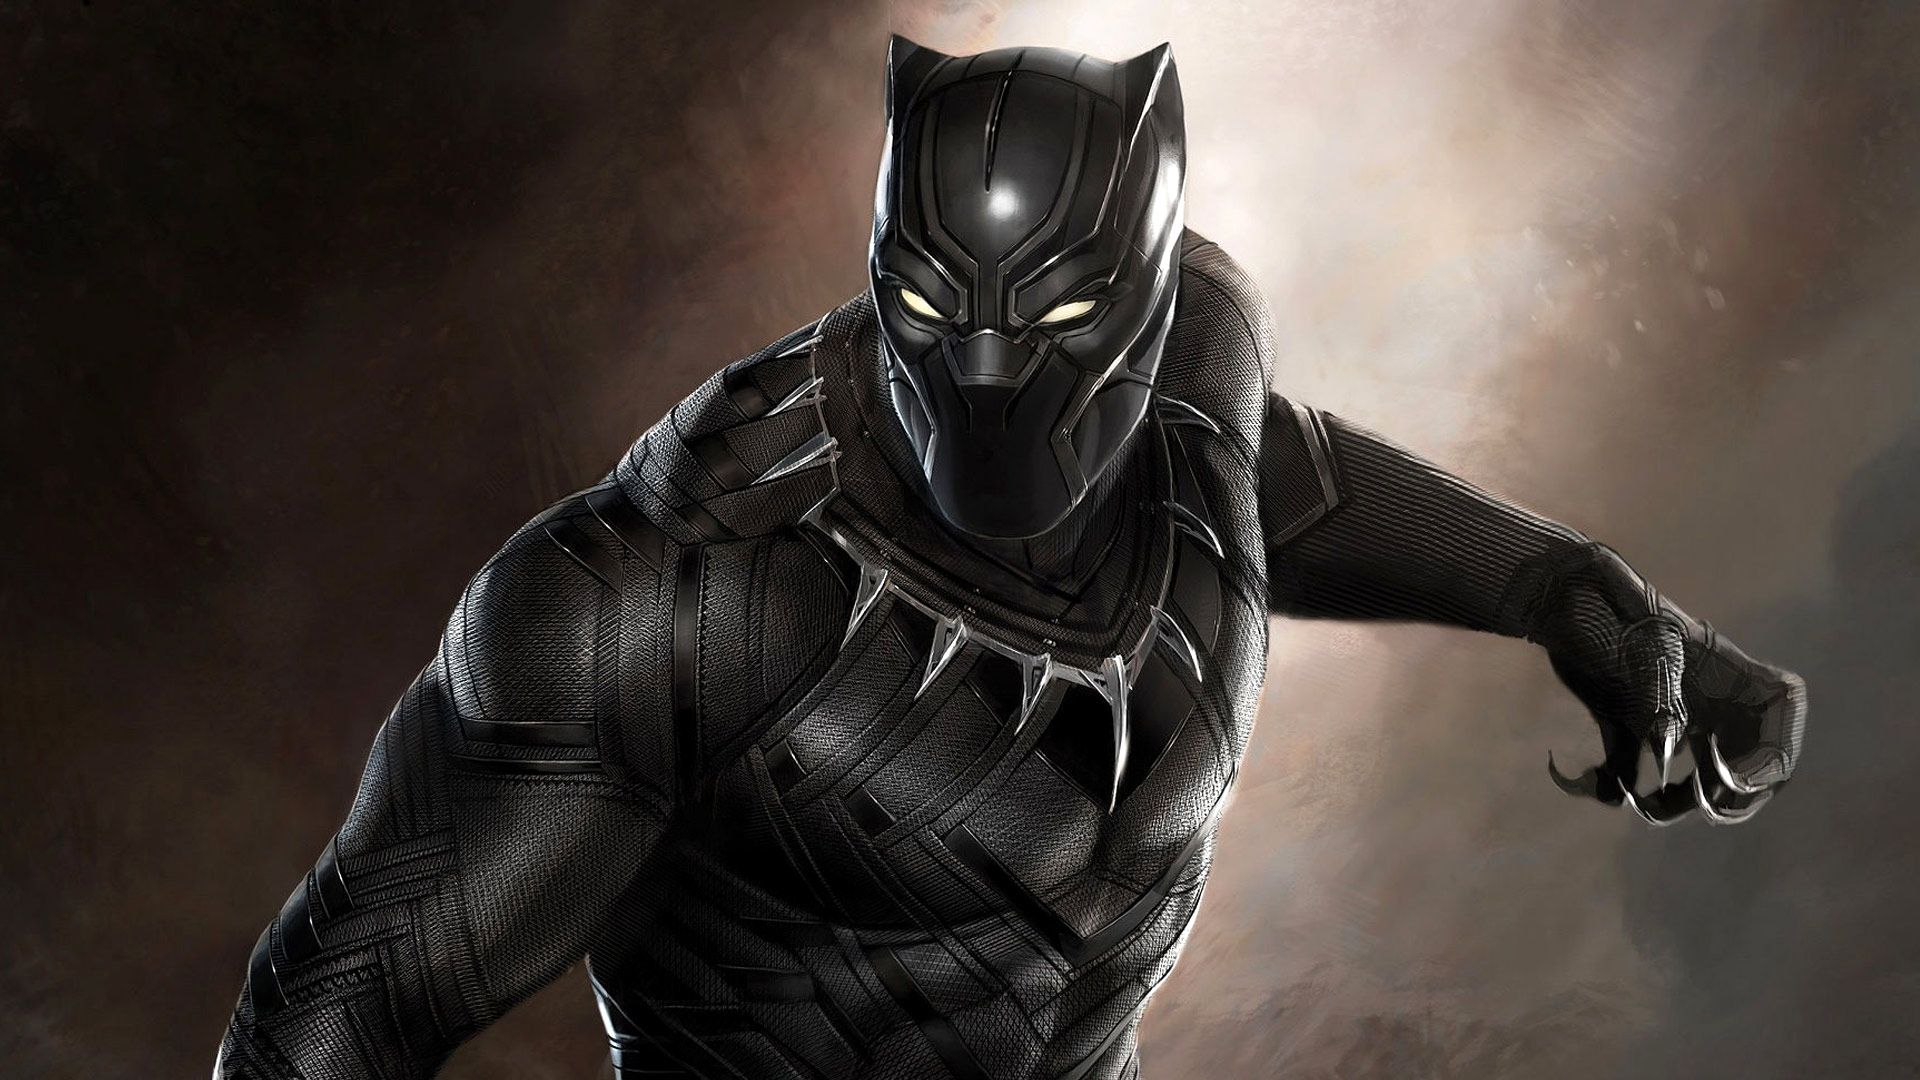 1920x1080 Download Black Panther Wallpaper For Iphone Ipad